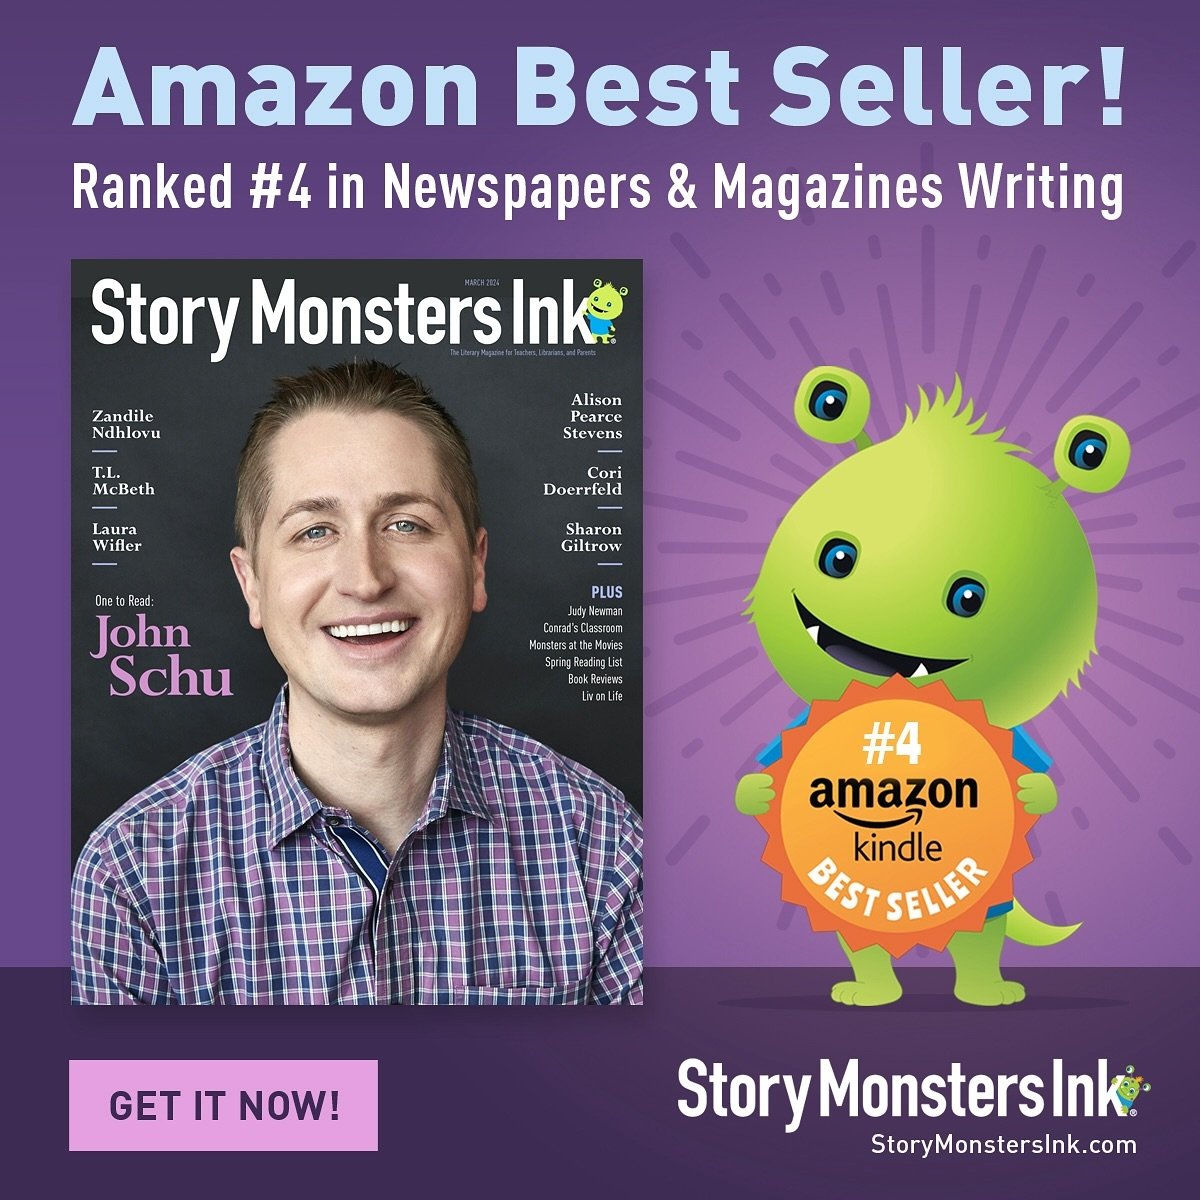 Did you know that there is a printed edition of Story Monsters Ink available on Amazon? And the best part is that the digital edition is completely free forever. You can find it at www.StoryMonstersInk.com or check it out on Amazon here: https://stor